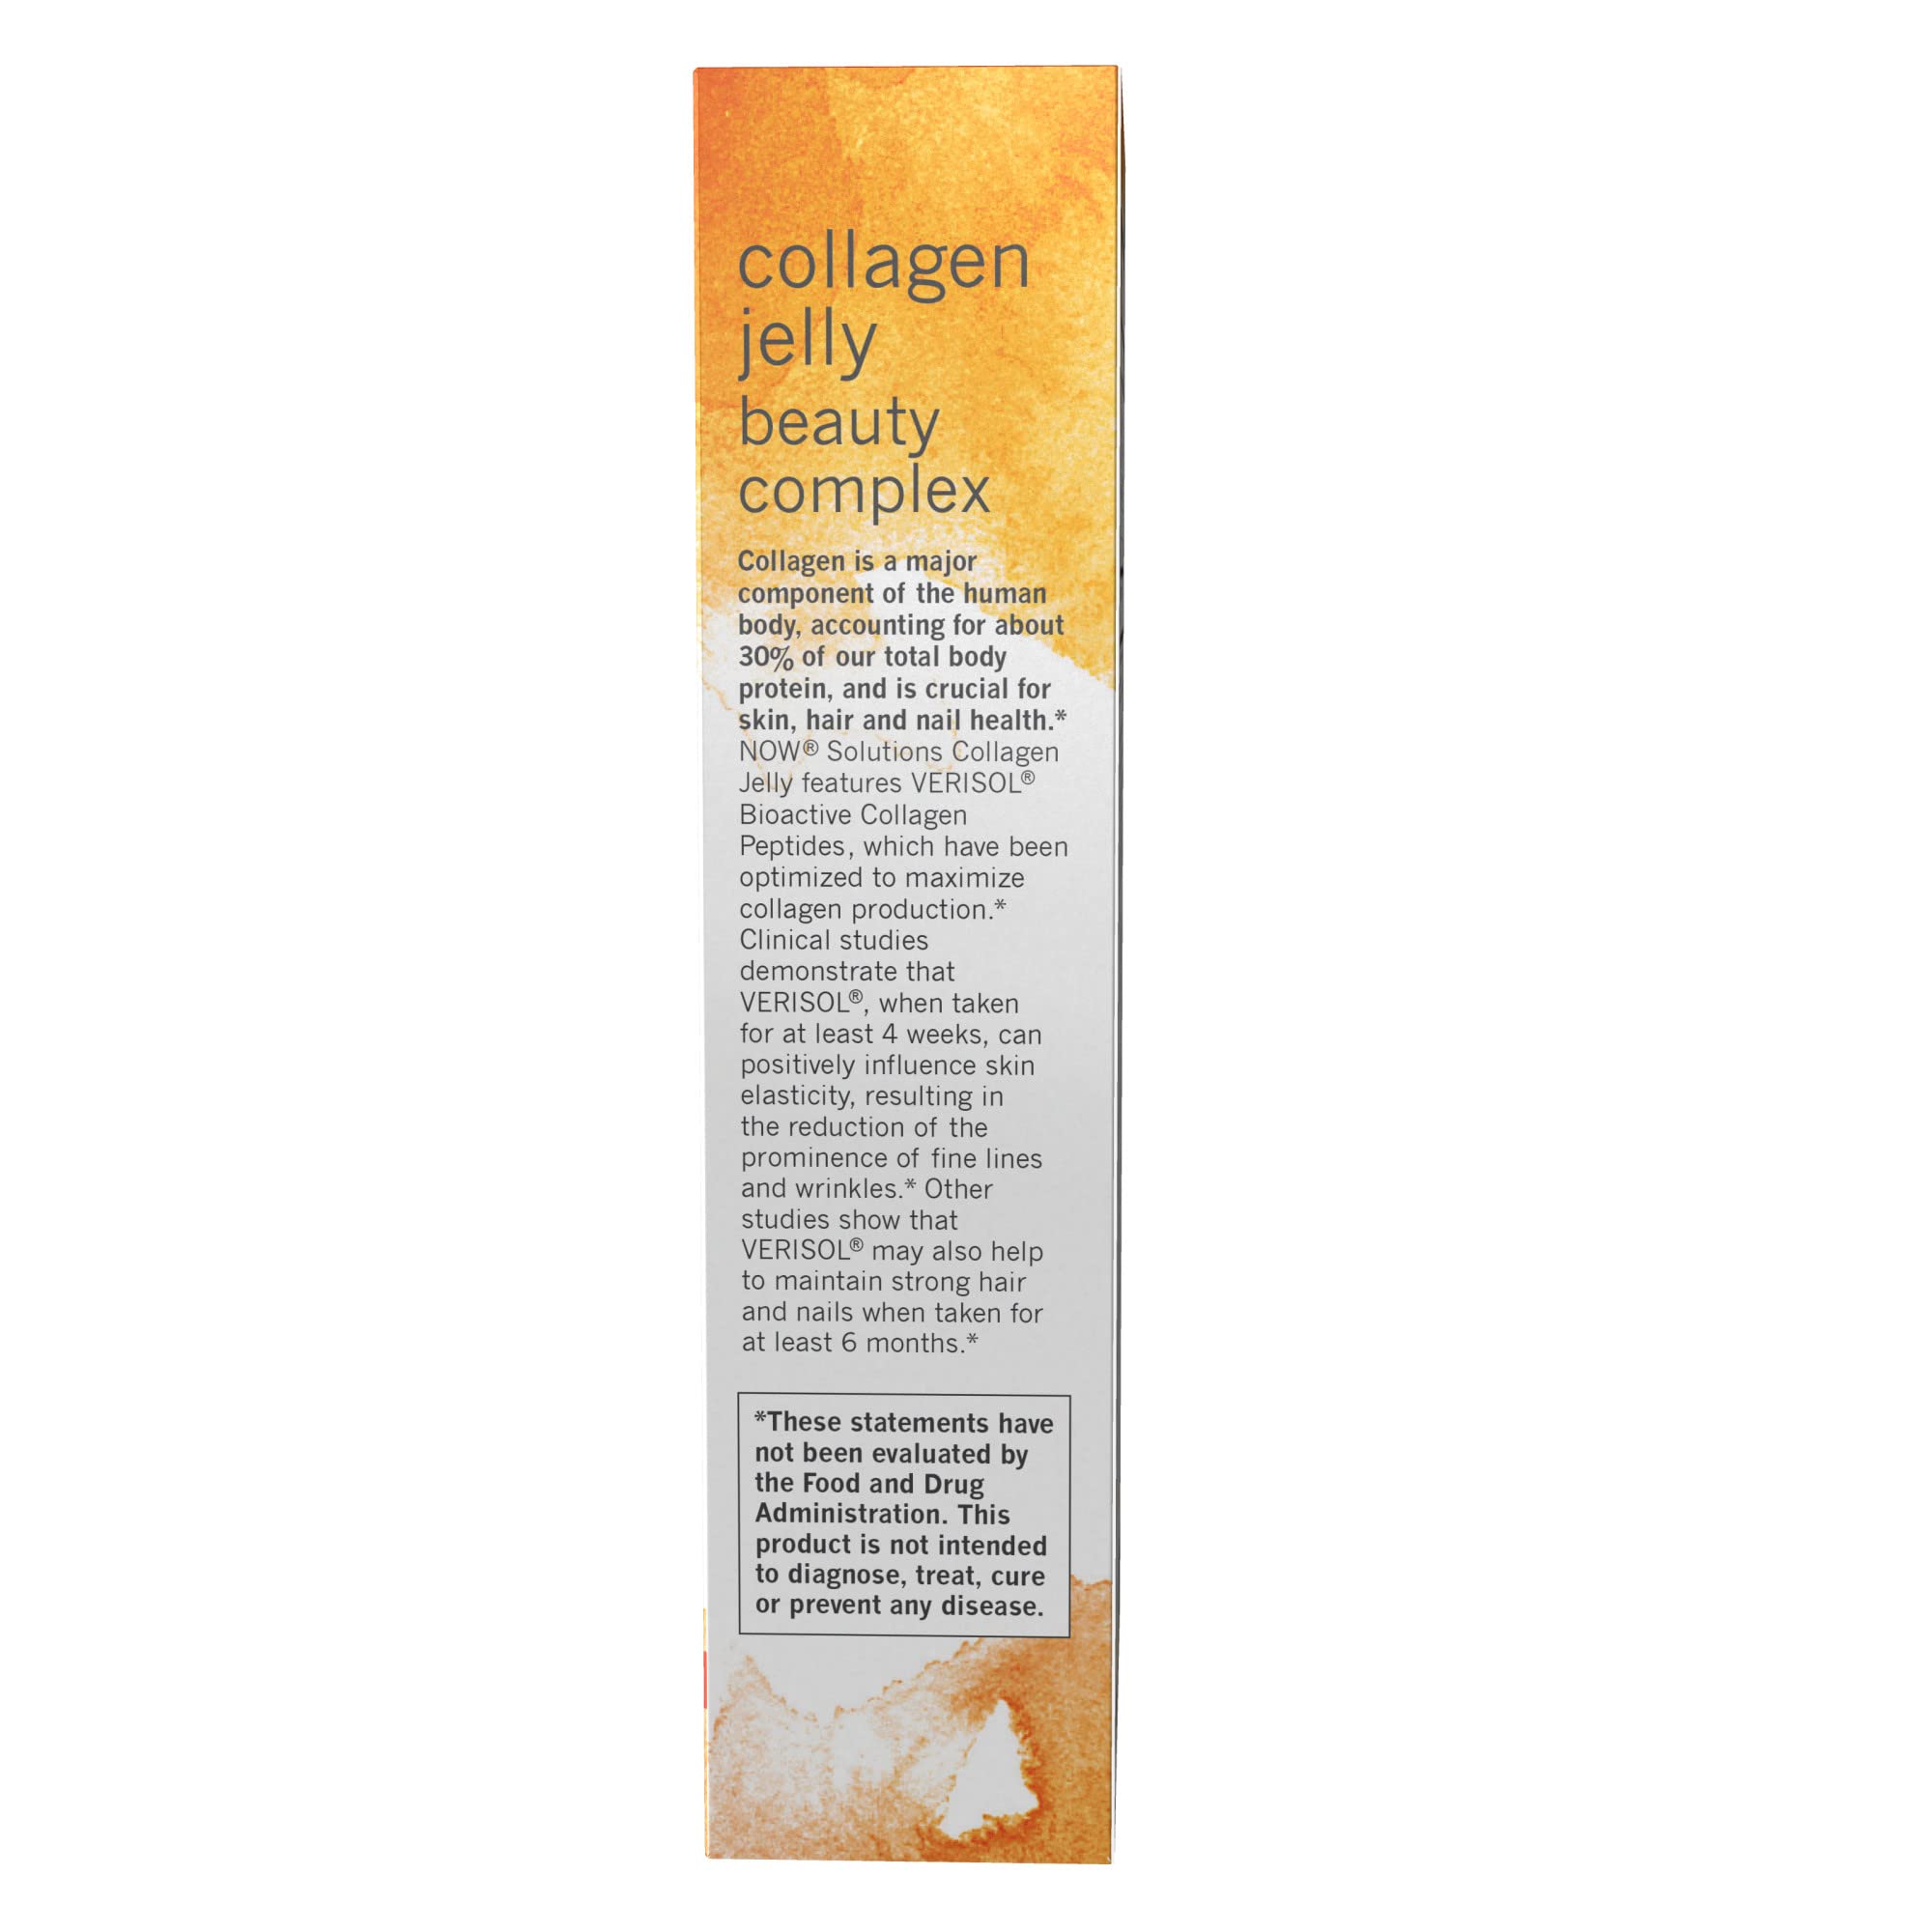 NOW Solutions, Collagen Jelly Beauty Complex, Sweet Orange Flavor, 10 Jelly Sticks